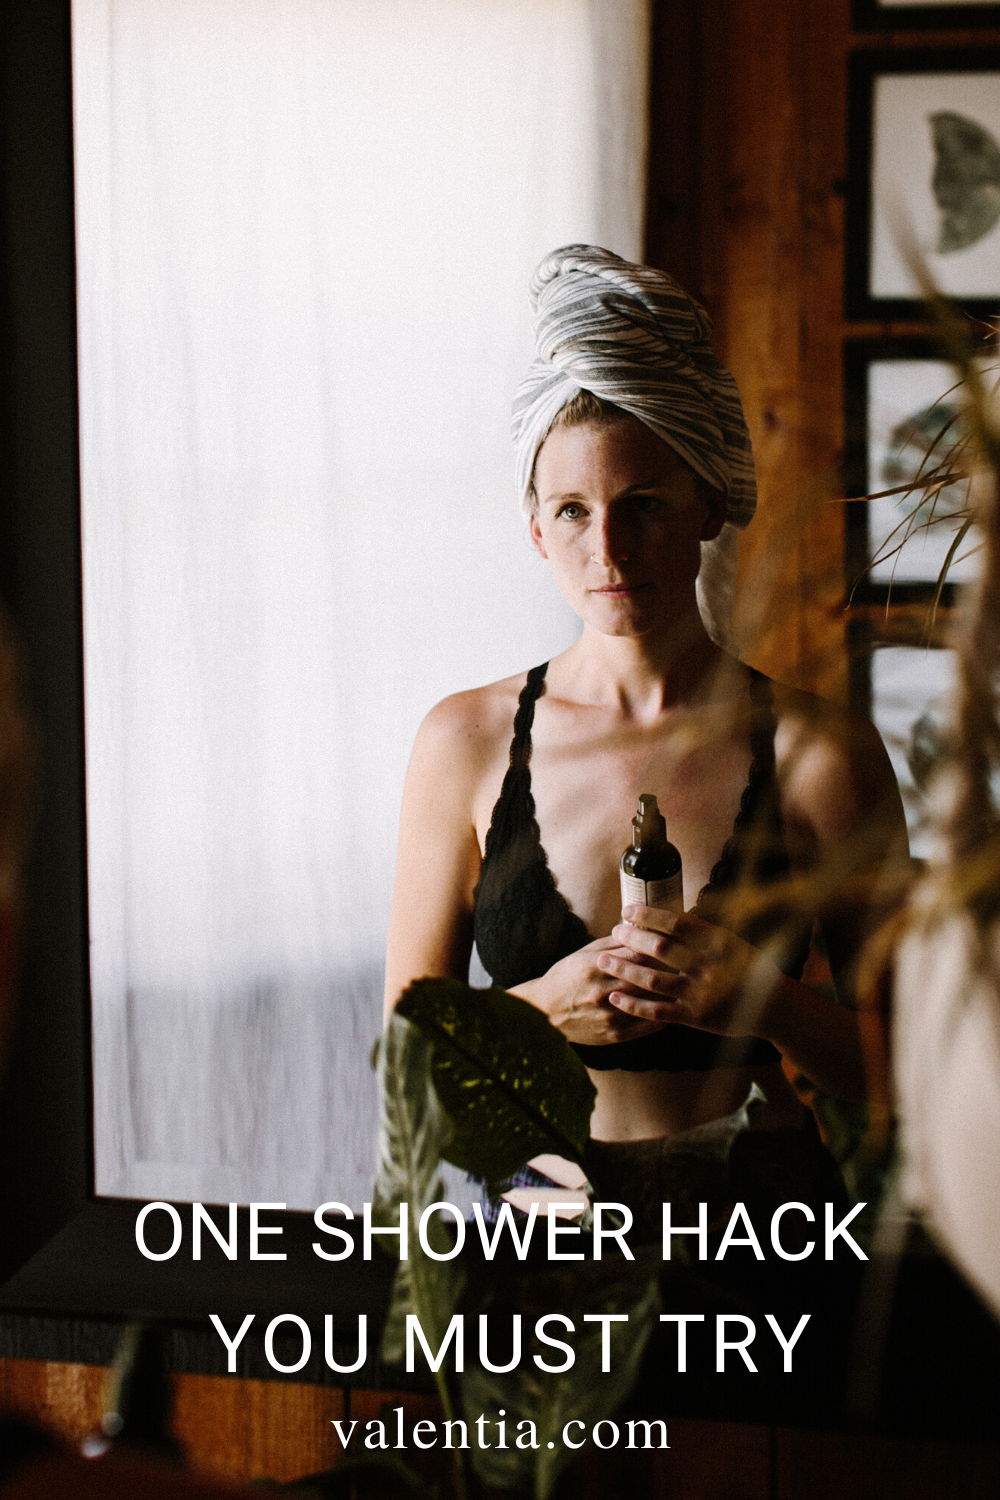 Want to keep your skin hydrated and happy? You'll want to try this pre-shower hack for your smoothest skin yet. | One way to keep your skin hydrated and happy is to apply the oil of your choice before you shower. Pin now and make sure your next shower is your best!